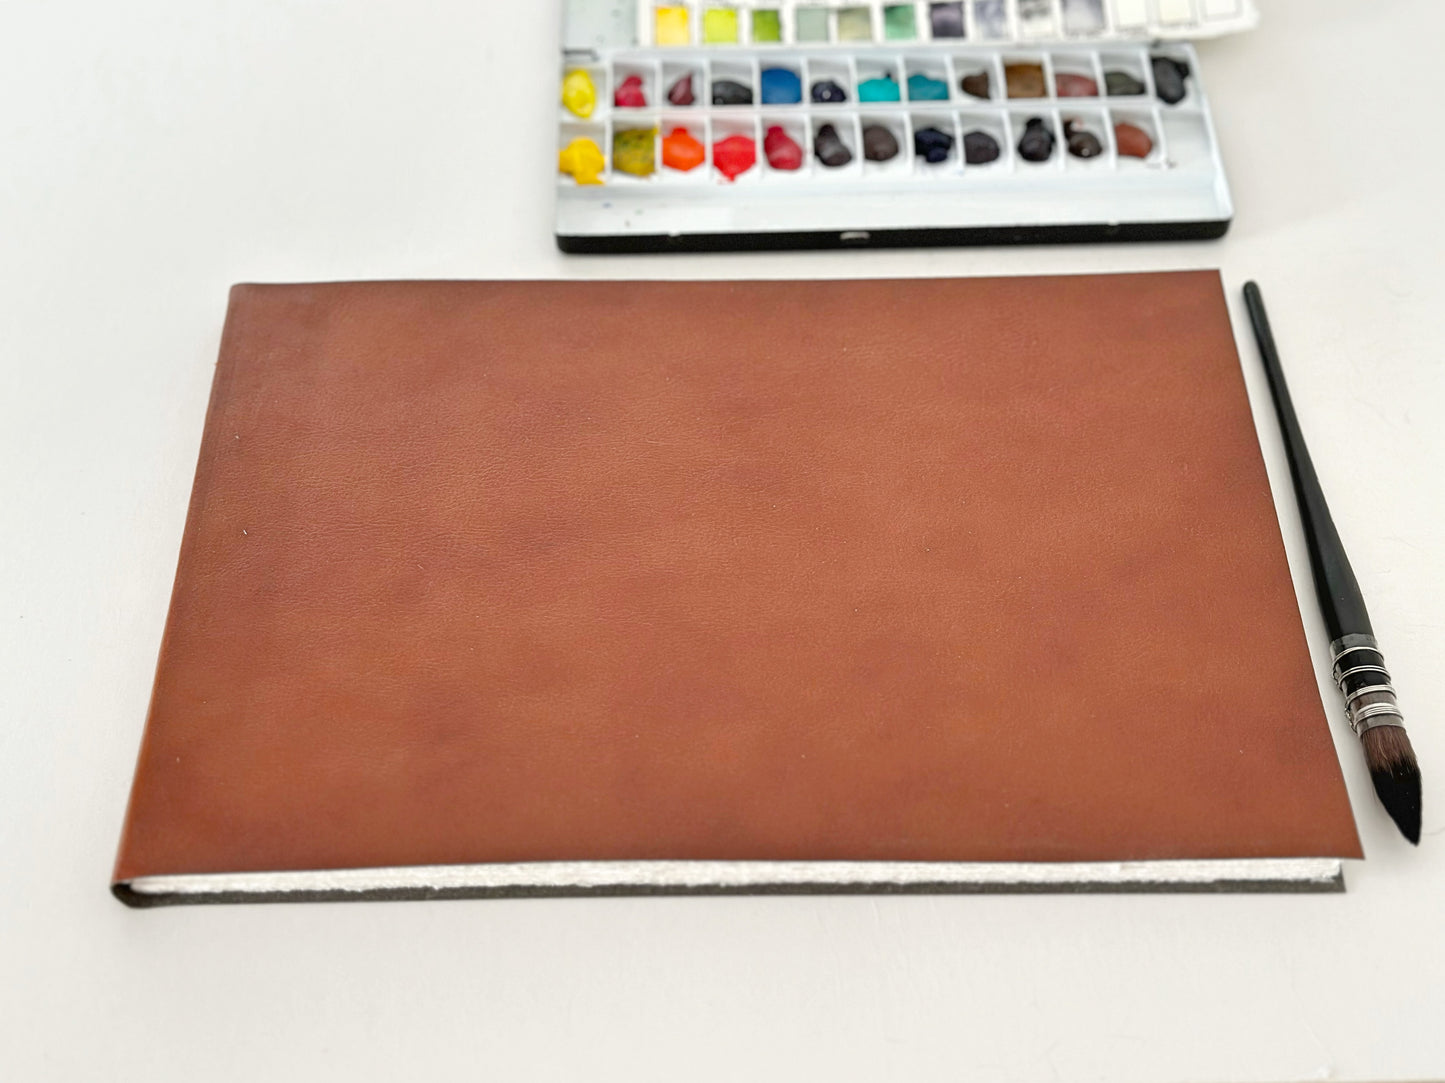 Large Pl Leather Sketchbook with 140lb Cotton Watercolor Paper in Land –